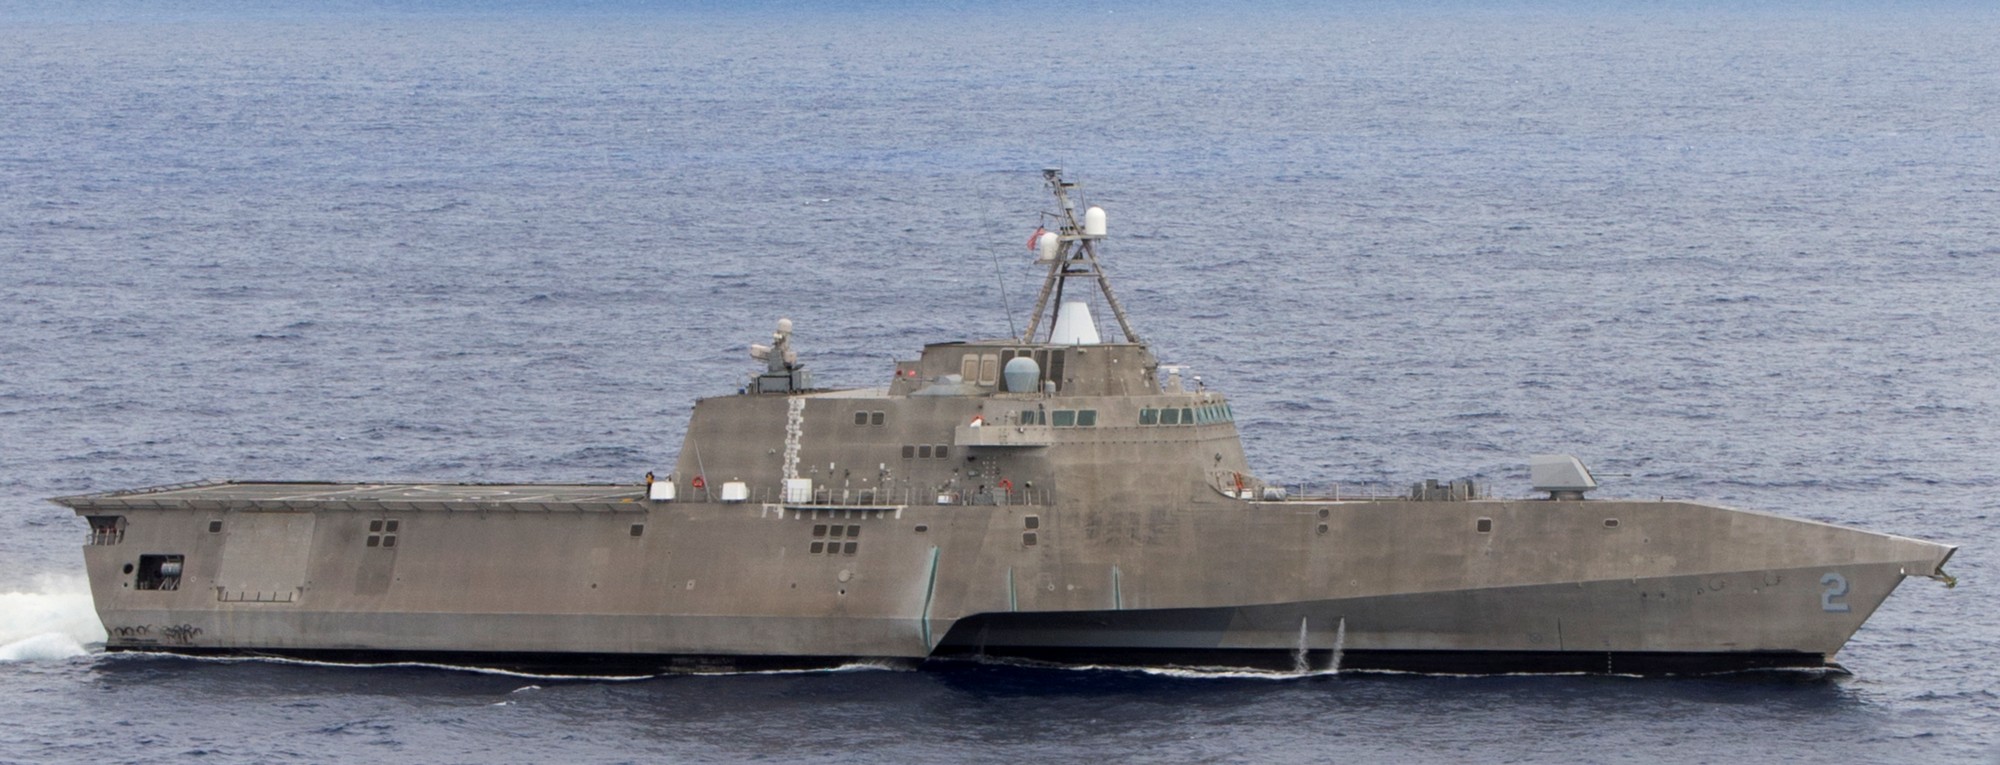 lcs-2 uss independence littoral combat ship us navy class 05a